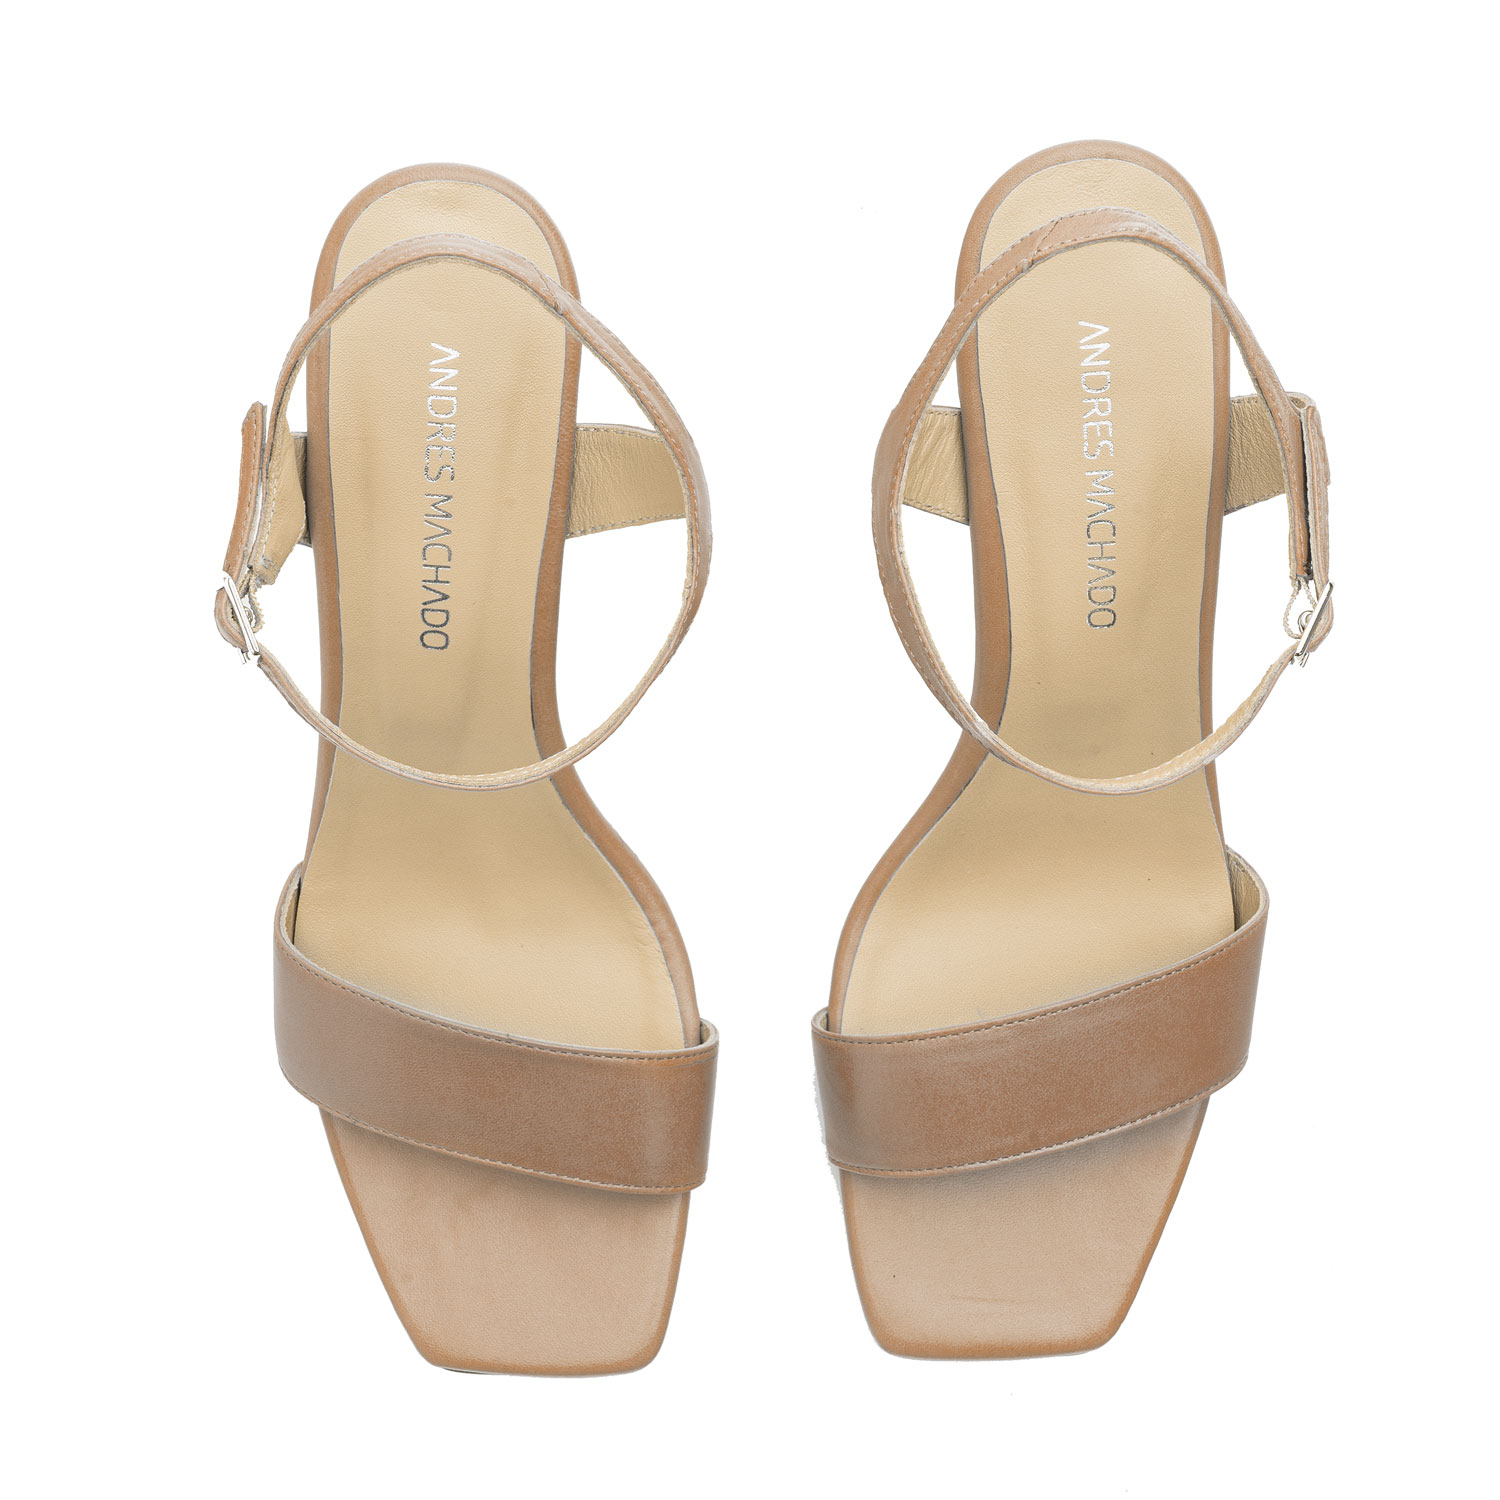 Ankle Stiletto Sandals in Nude Leather 